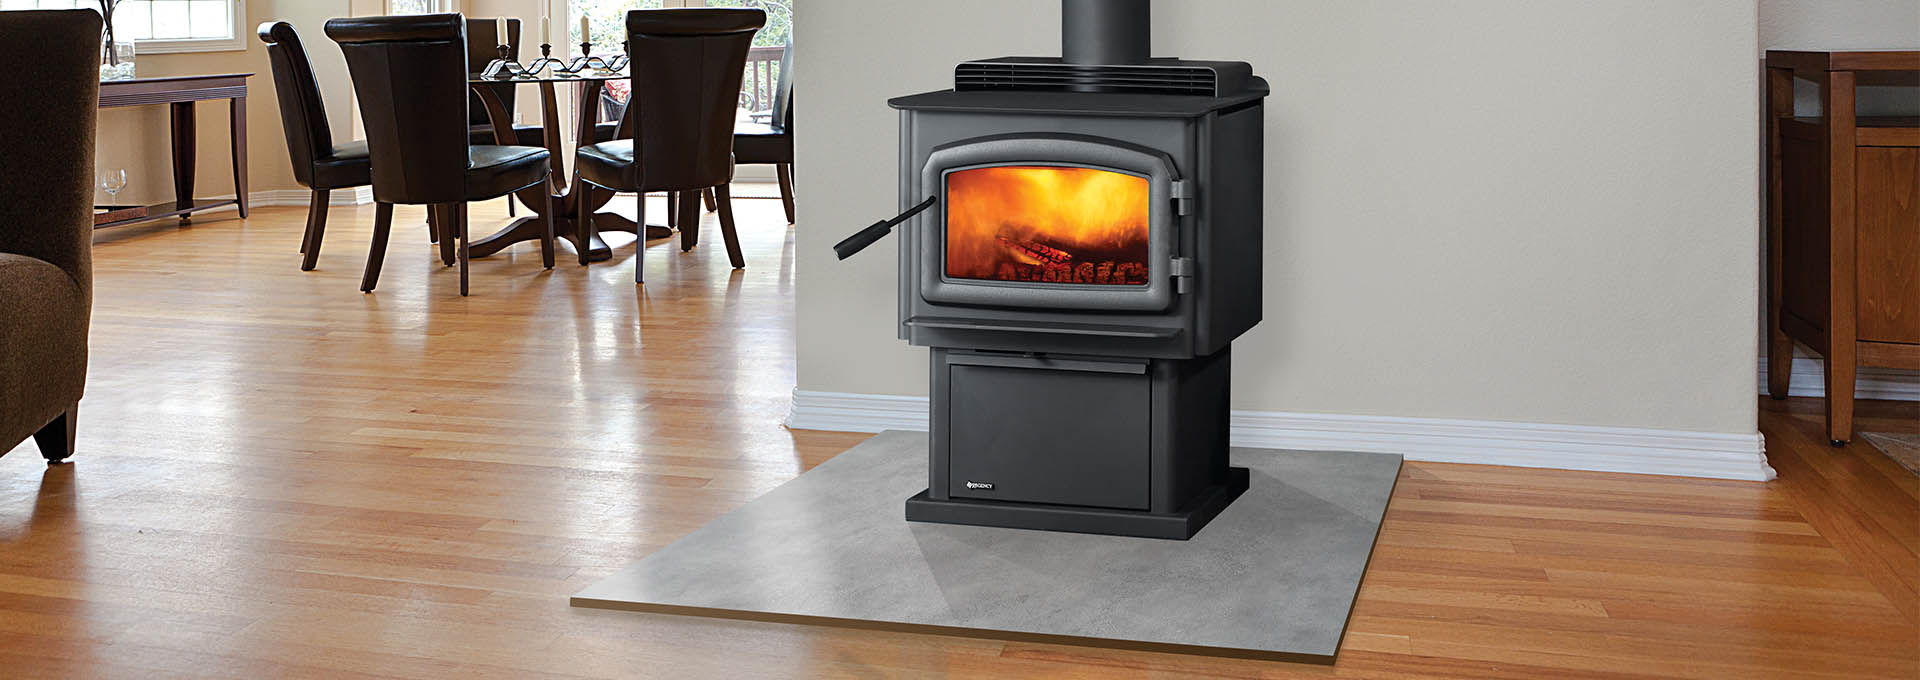 Regency F2450 Wood Stove lit in living room with dining room view behind it